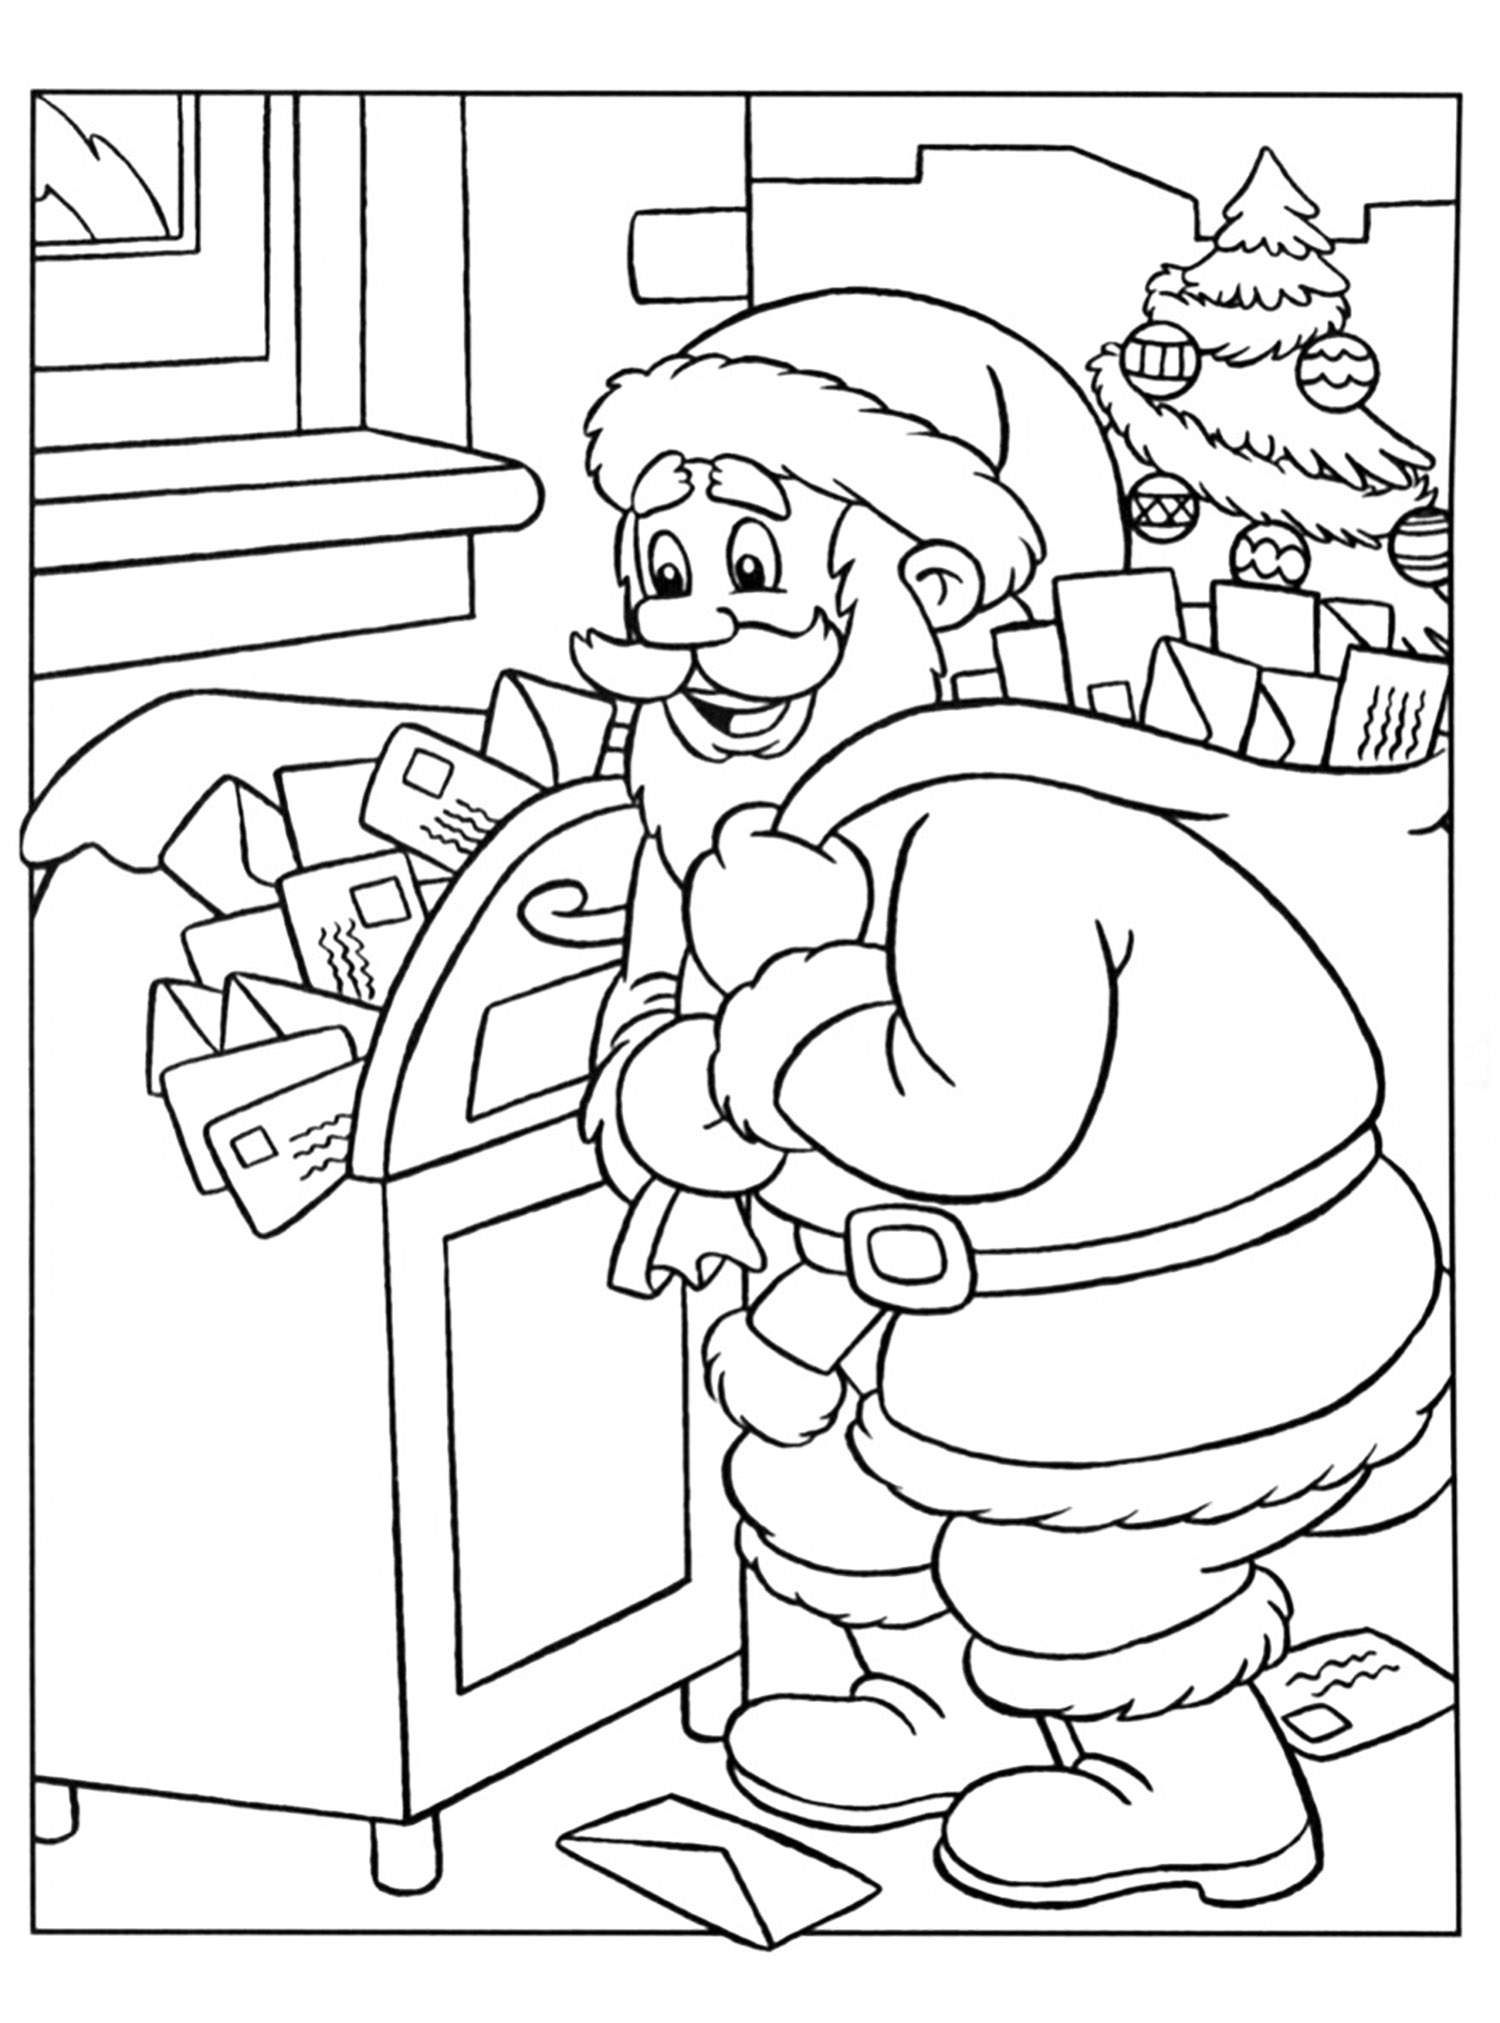 printable-letter-to-santa-coloring-page